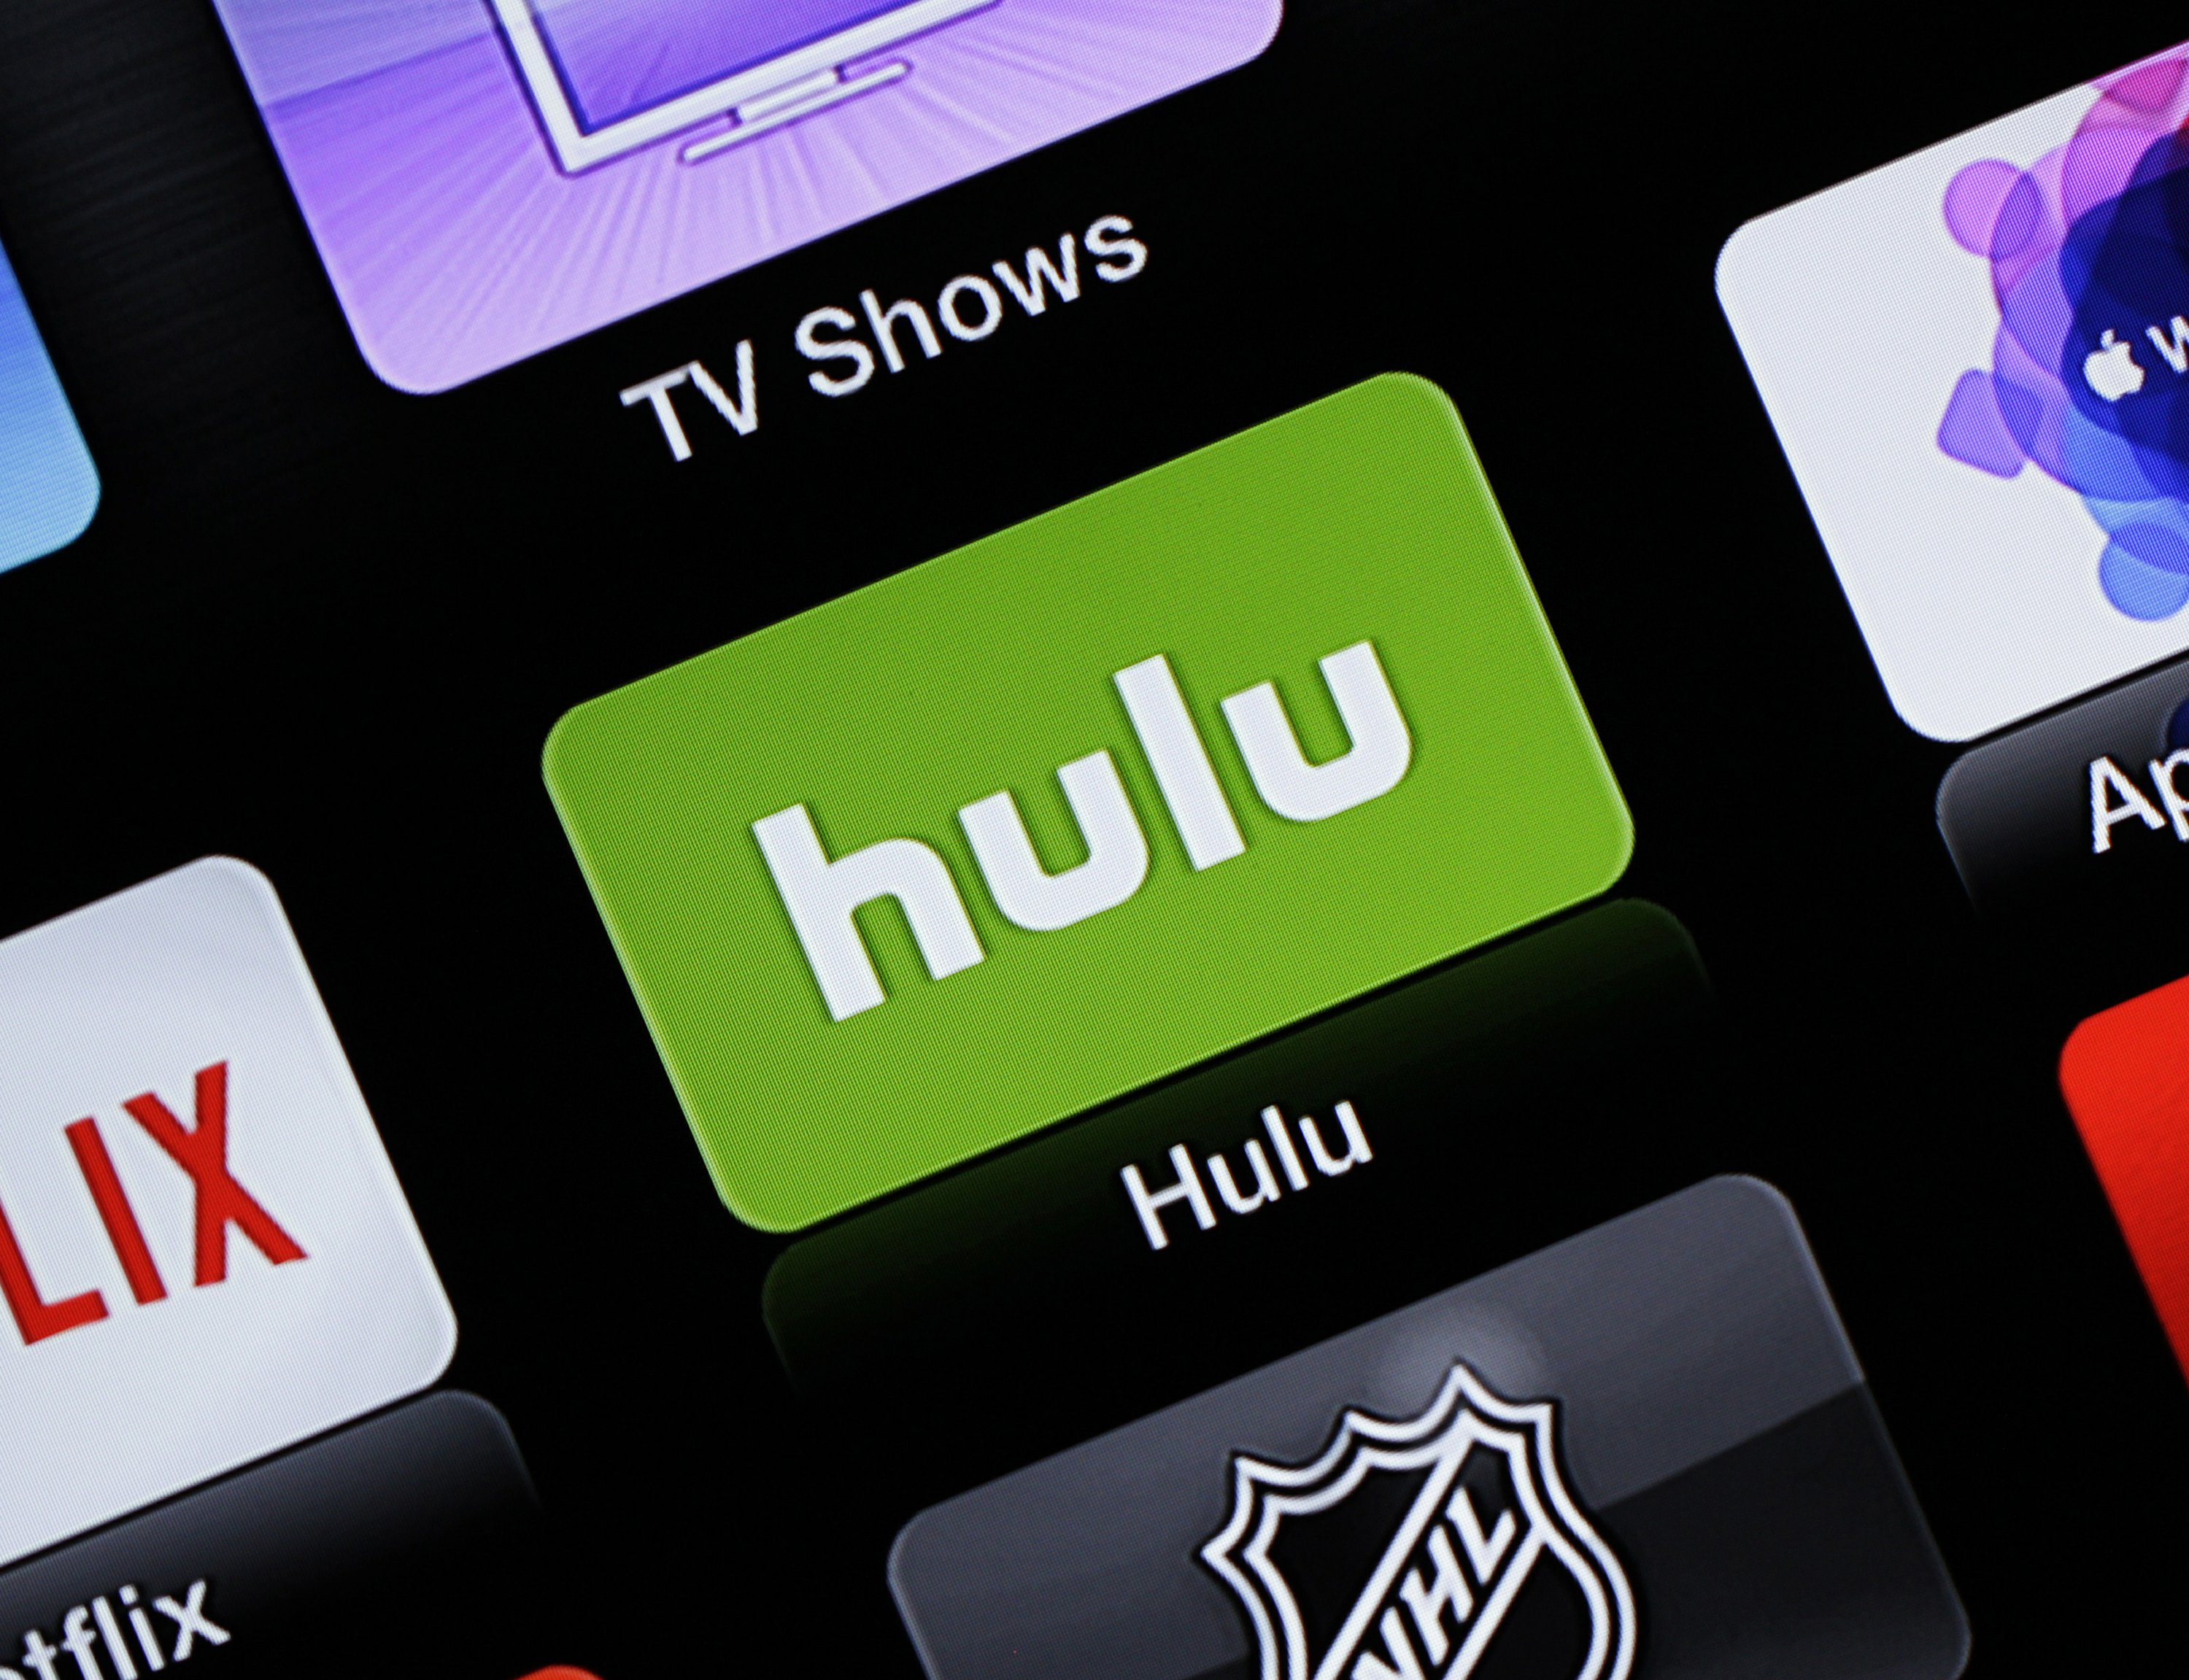 Hulu ups price for liveTV service, cuts basic package price AP News